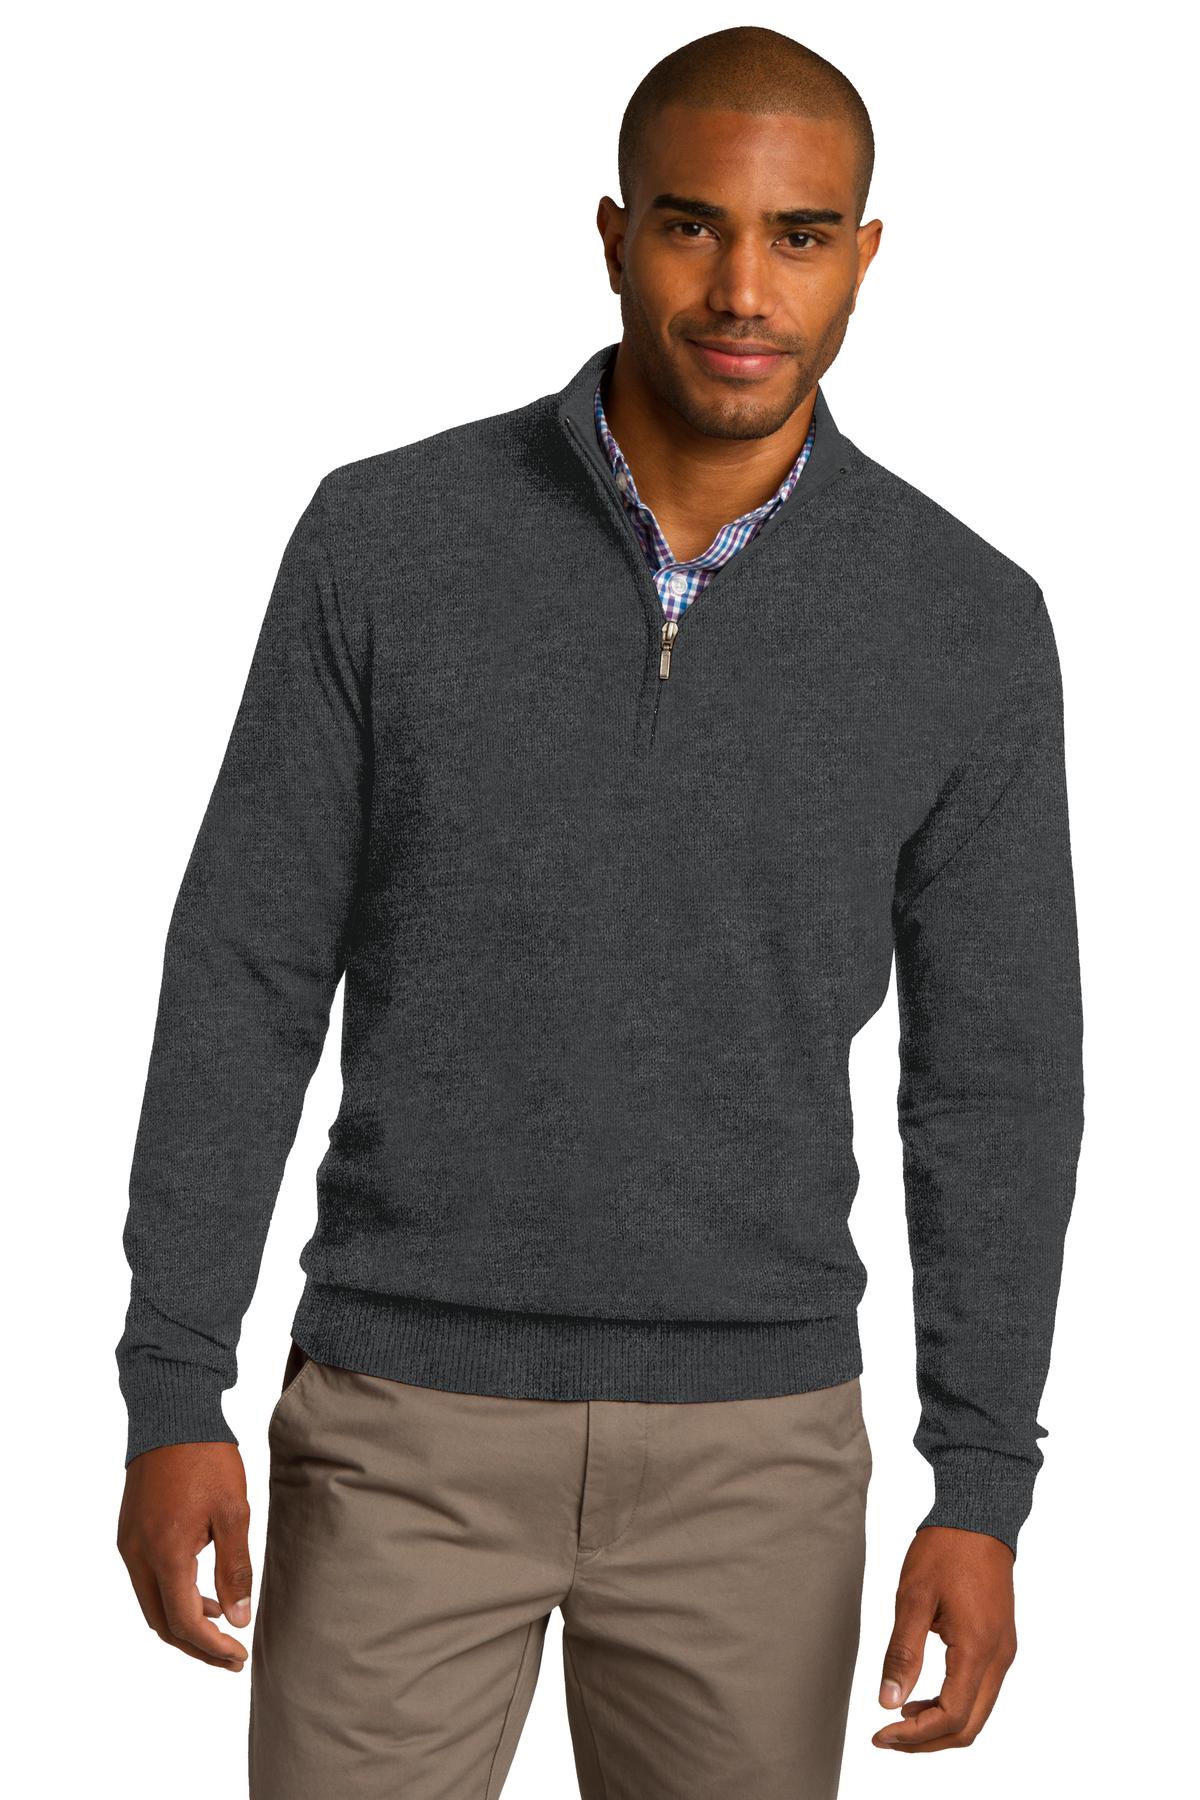 Polos/Knits Charcoal Heather Port Authority